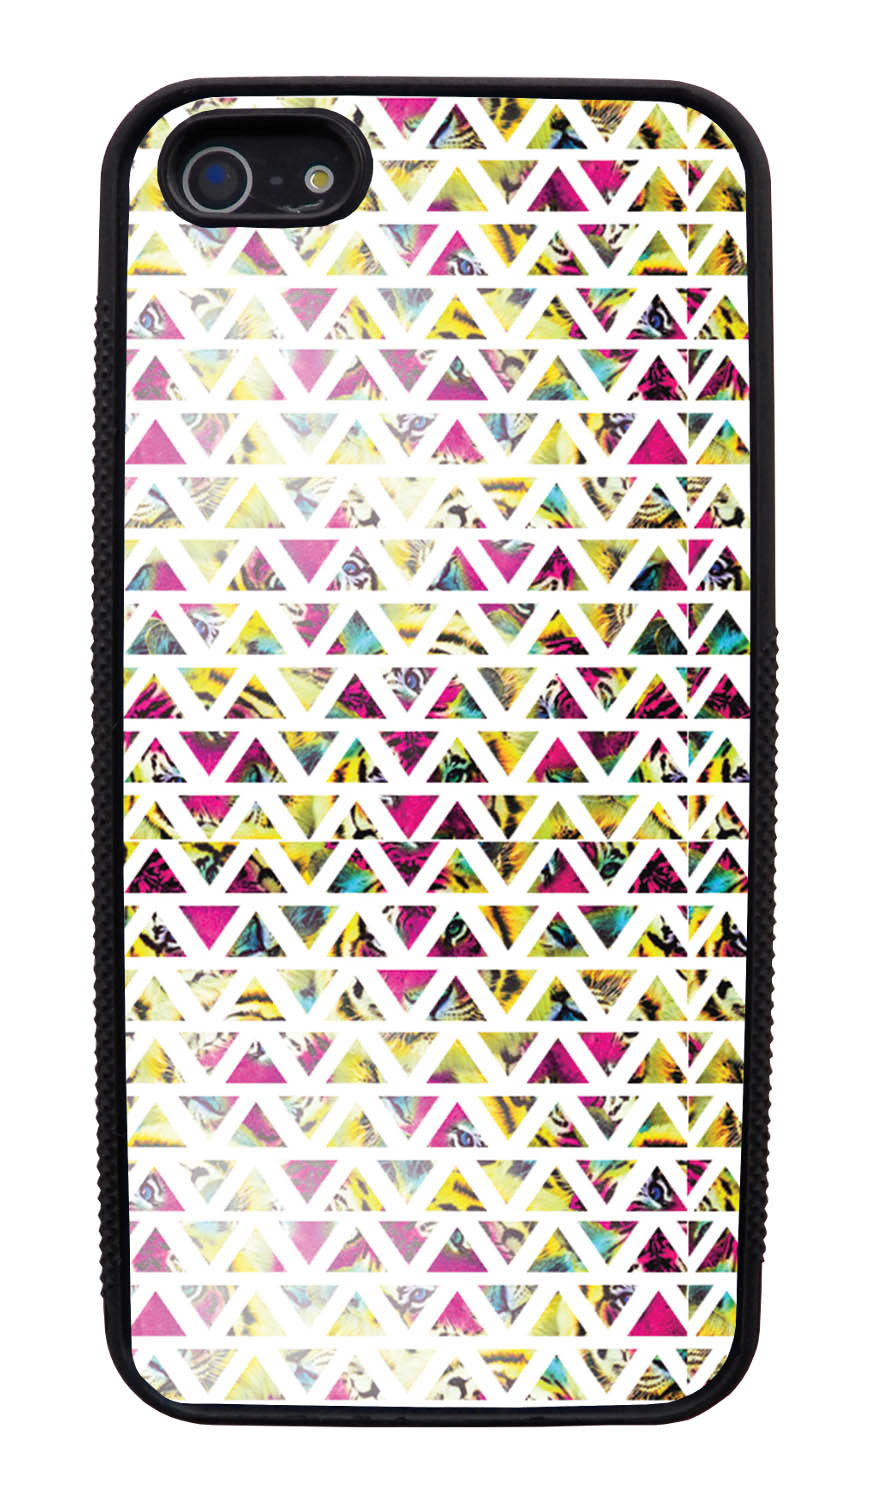 Apple iPhone 5 / 5S Aztec Case - Triangles On Pink Yellow Tiger - Geometric - Black Slim Rubber Case